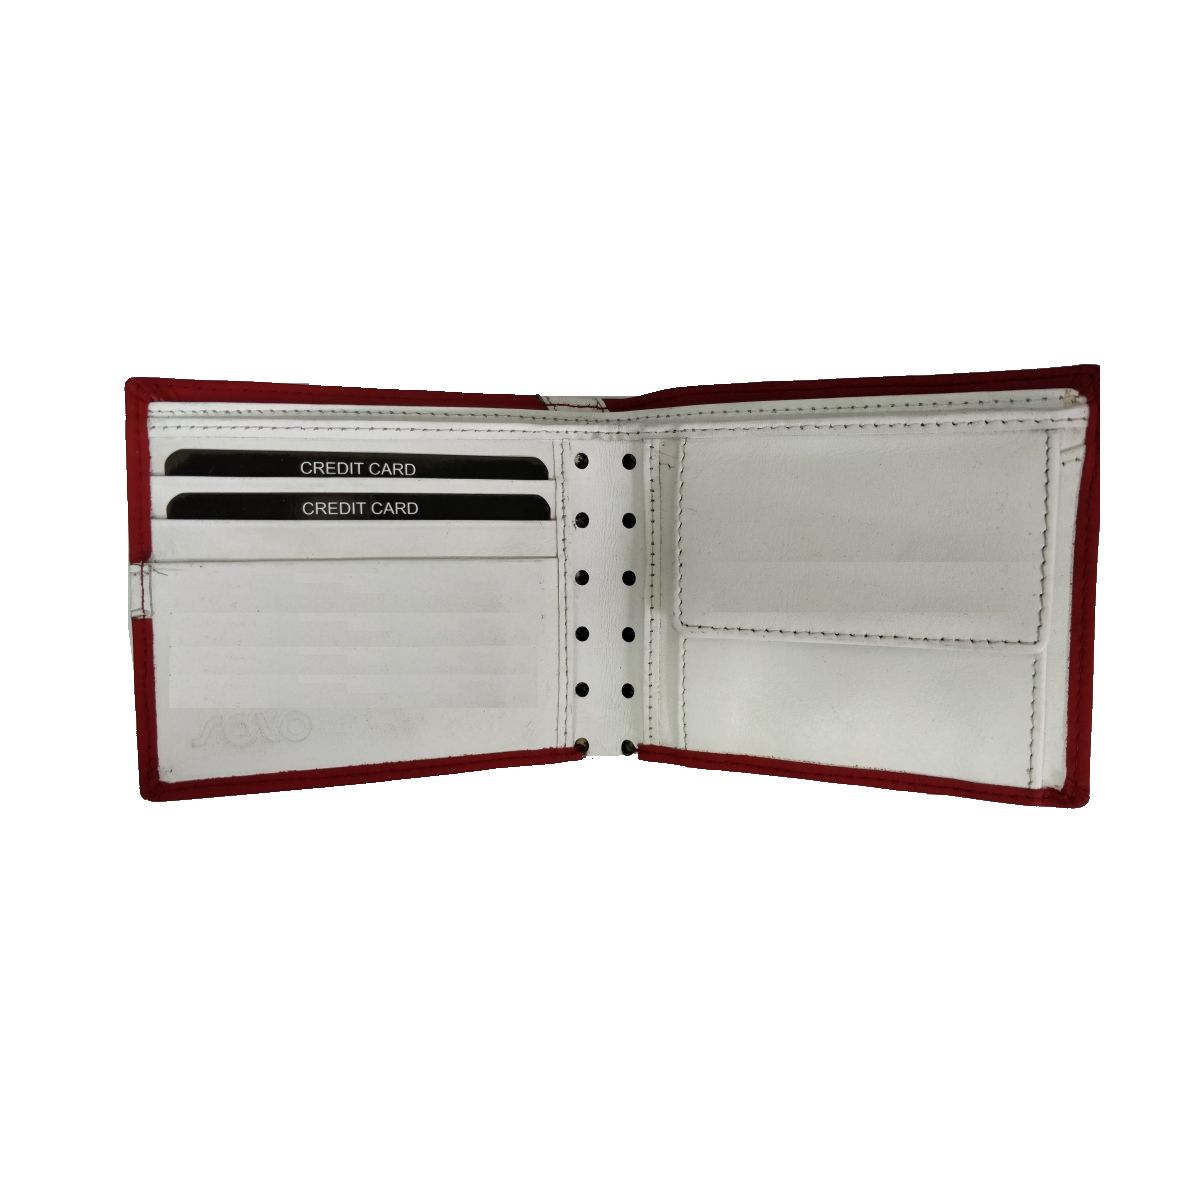 solo Leather Wallet With Broken Strip and Coin Pouch - Red/White